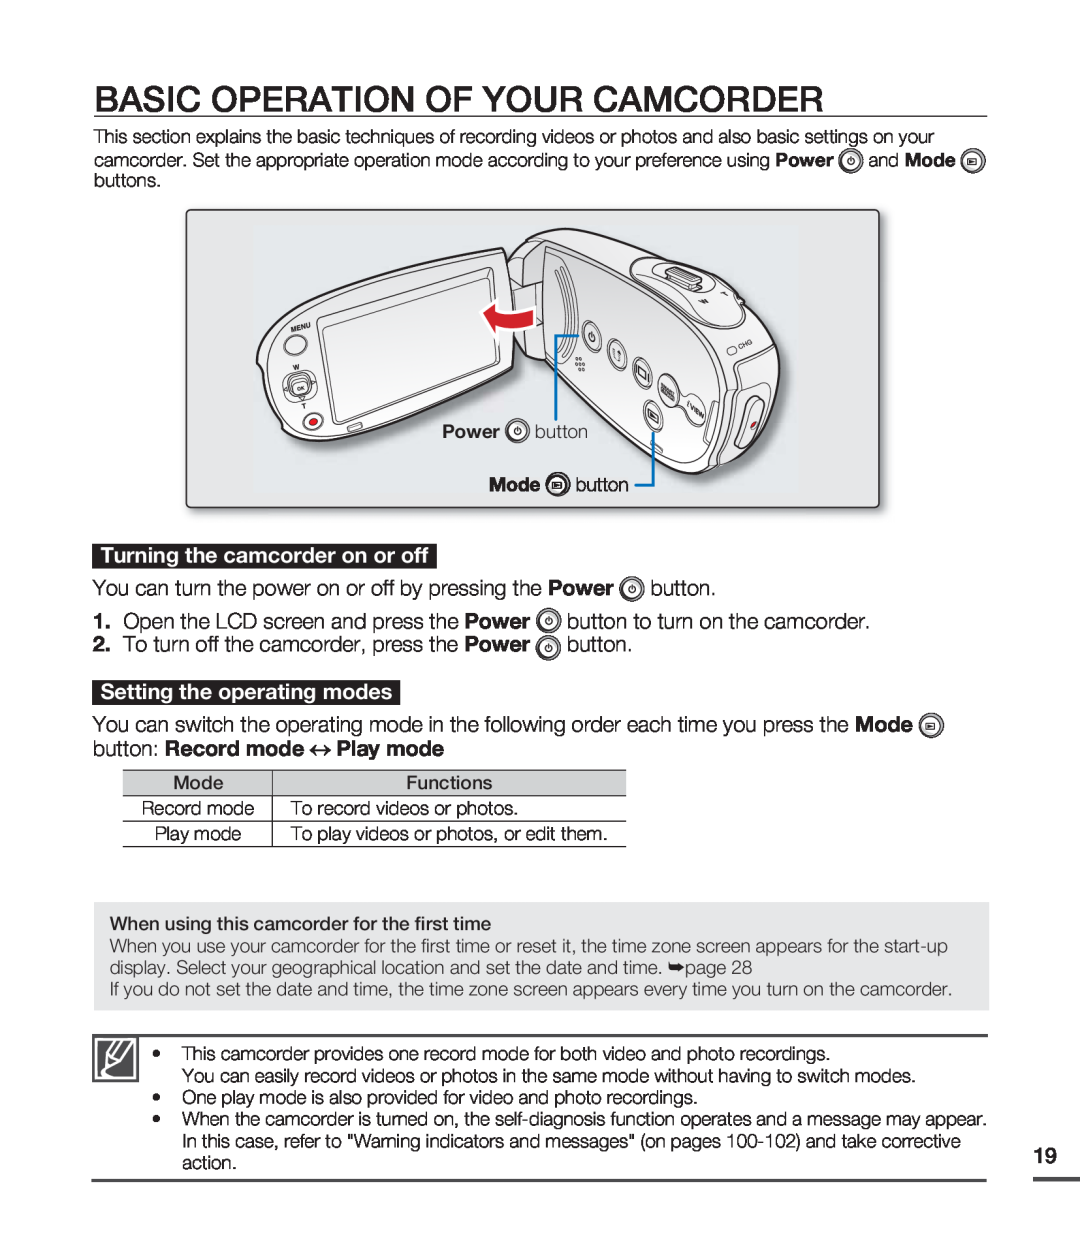 Samsung SMX-C20BP/XEK Basic Operation Of Your Camcorder, Turning the camcorder on or off, Setting the operating modes 